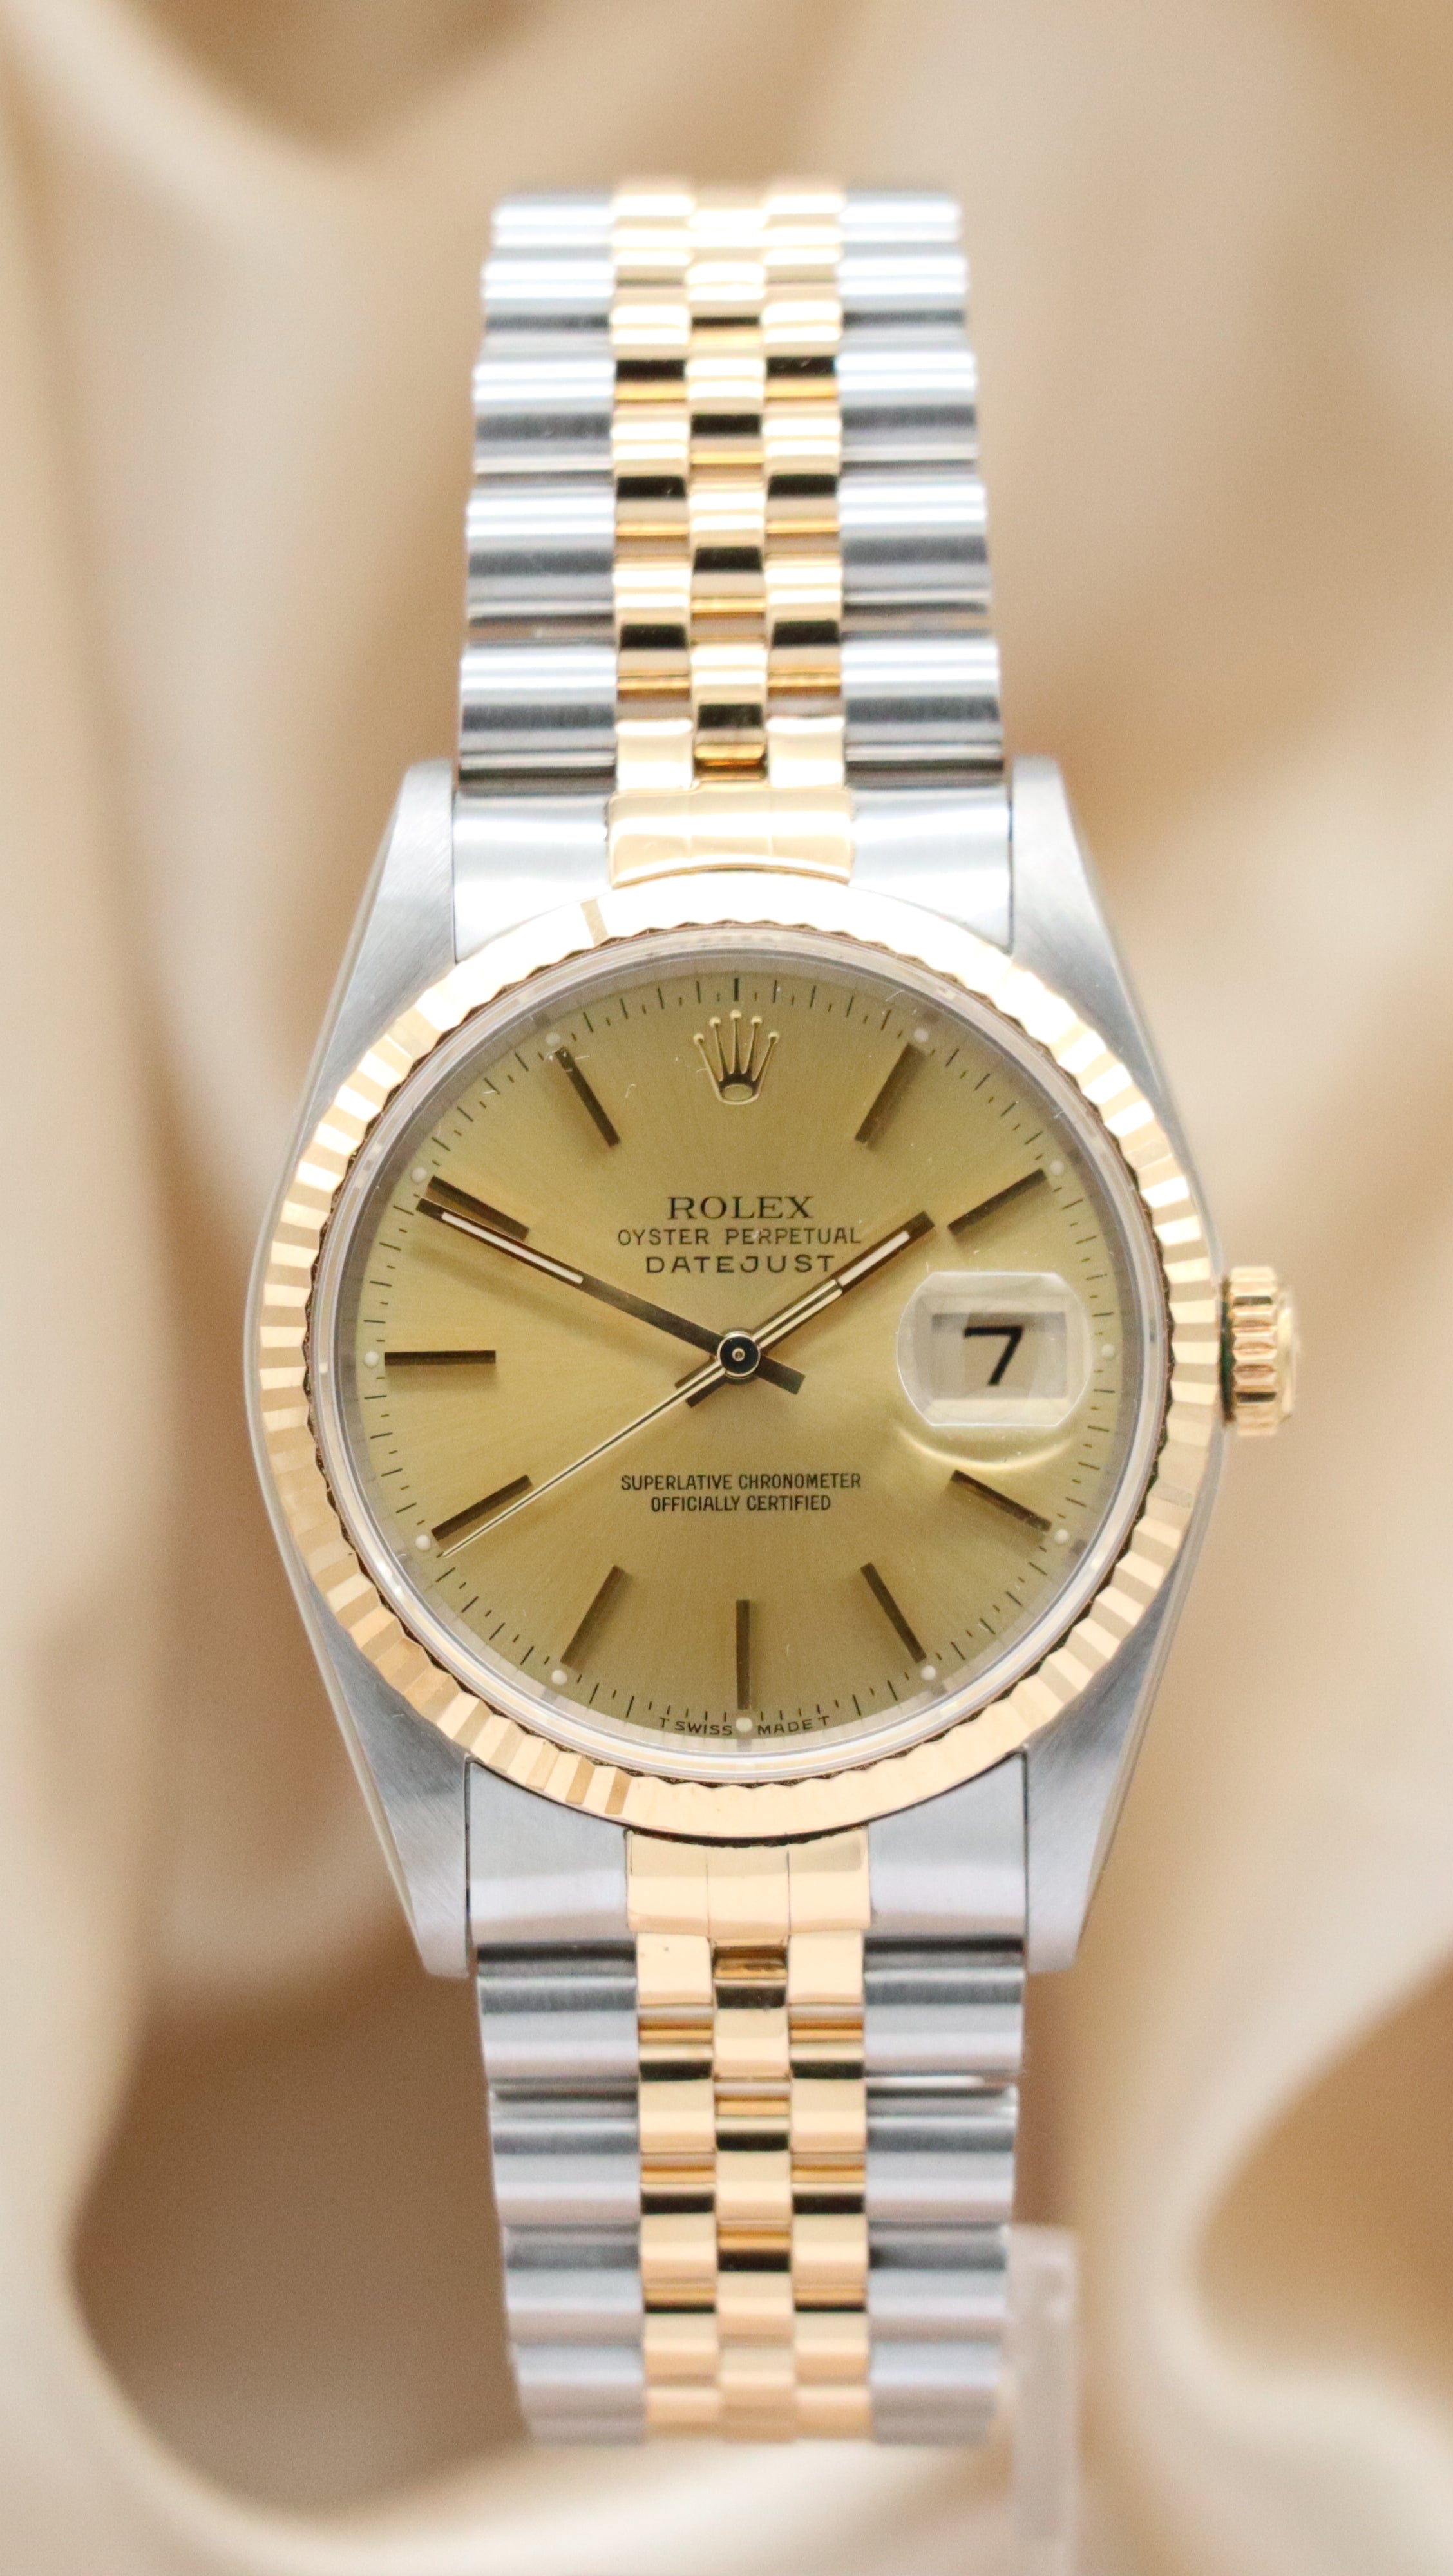 Rolex Oyster Perpetual Datejust Stahl/Gold  16233 Box + og. Papiere